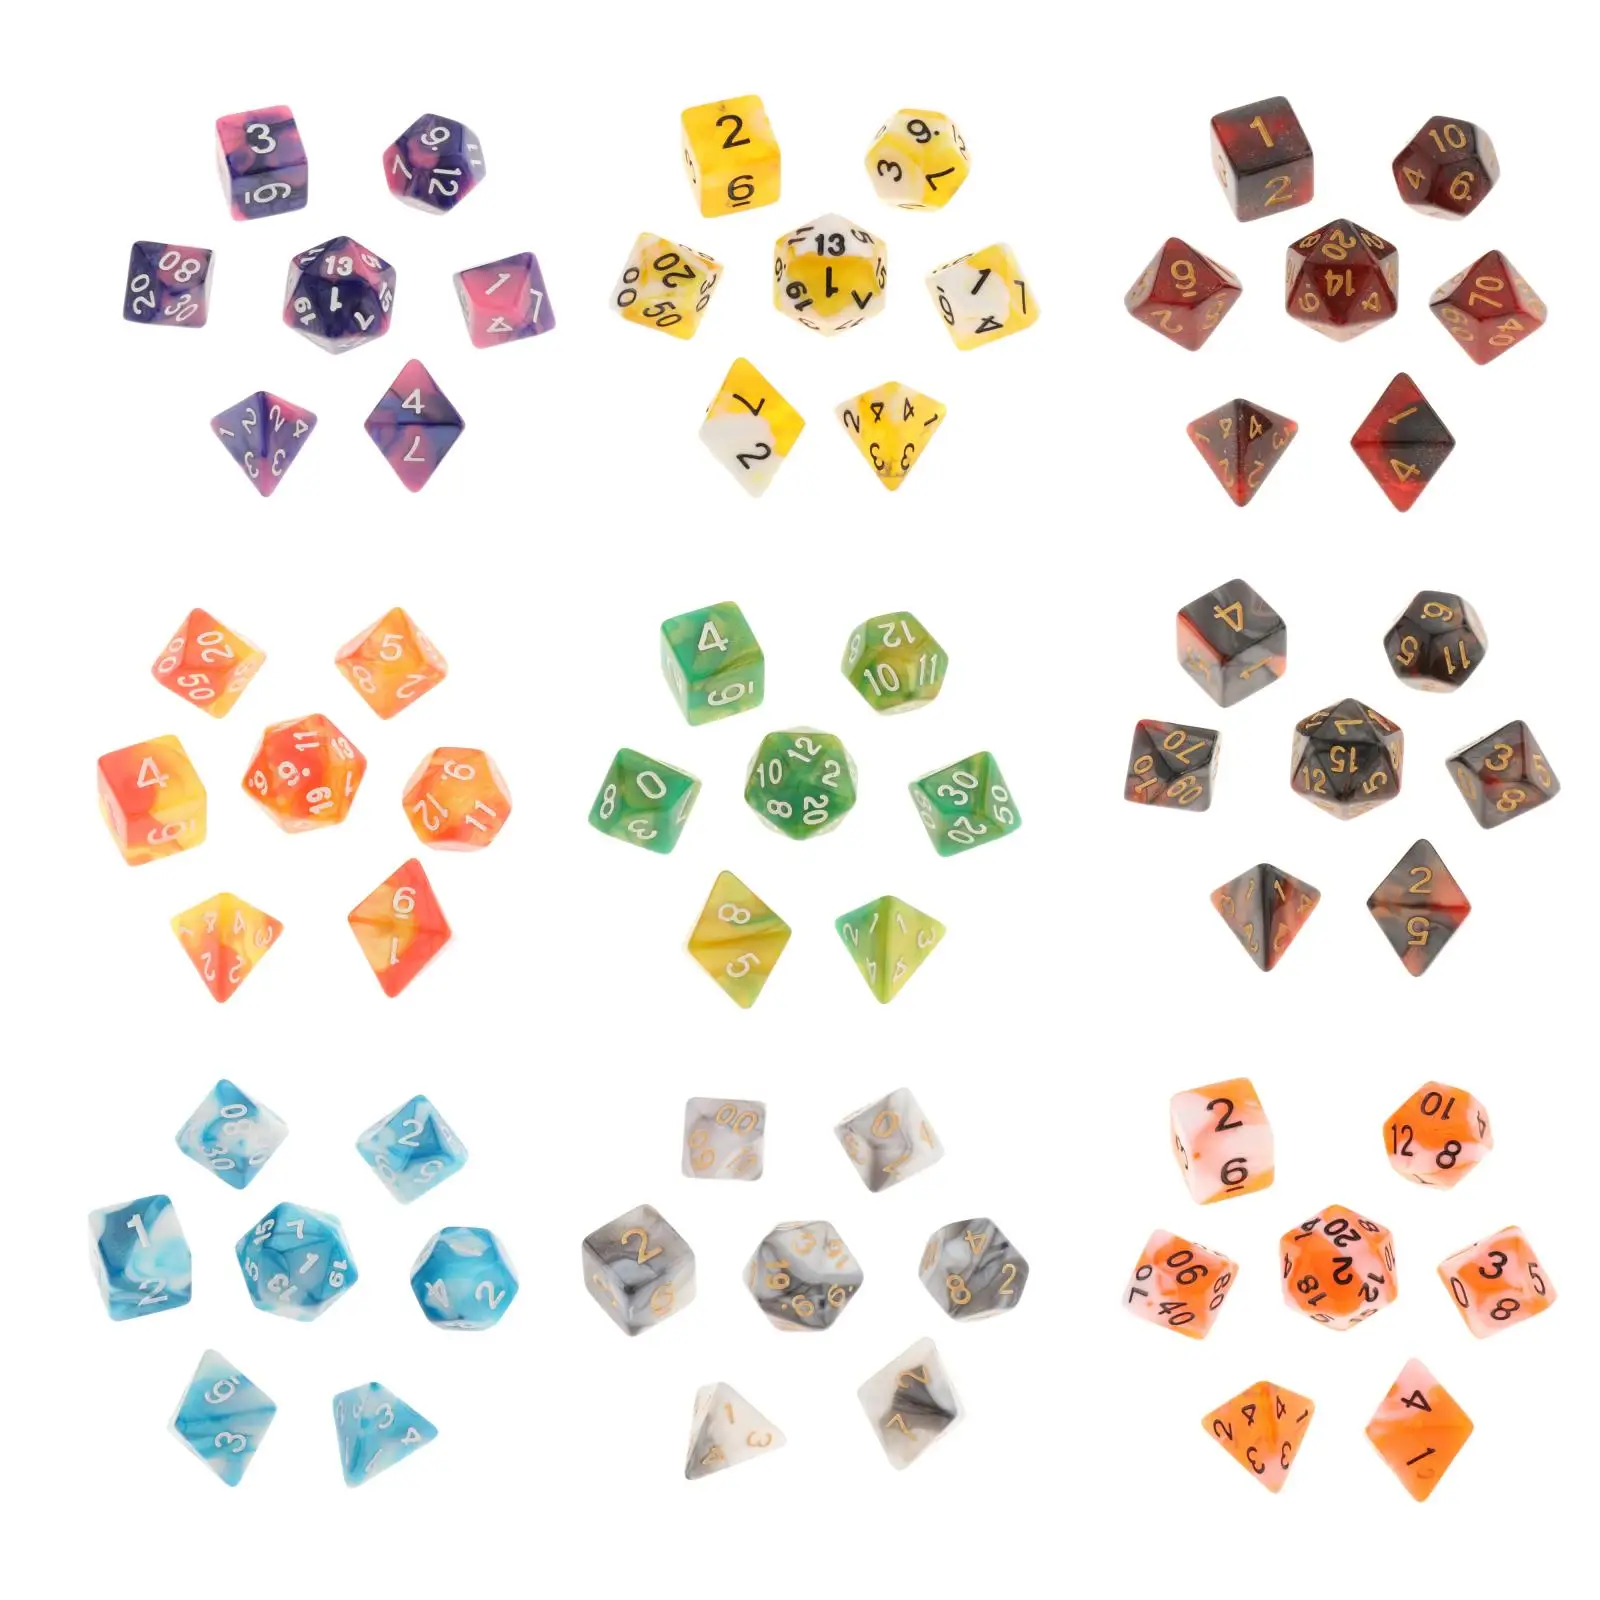 7Pcs TransparentClear Polyhedral Dices Multi-side With Bag For Table BoardGameJB 